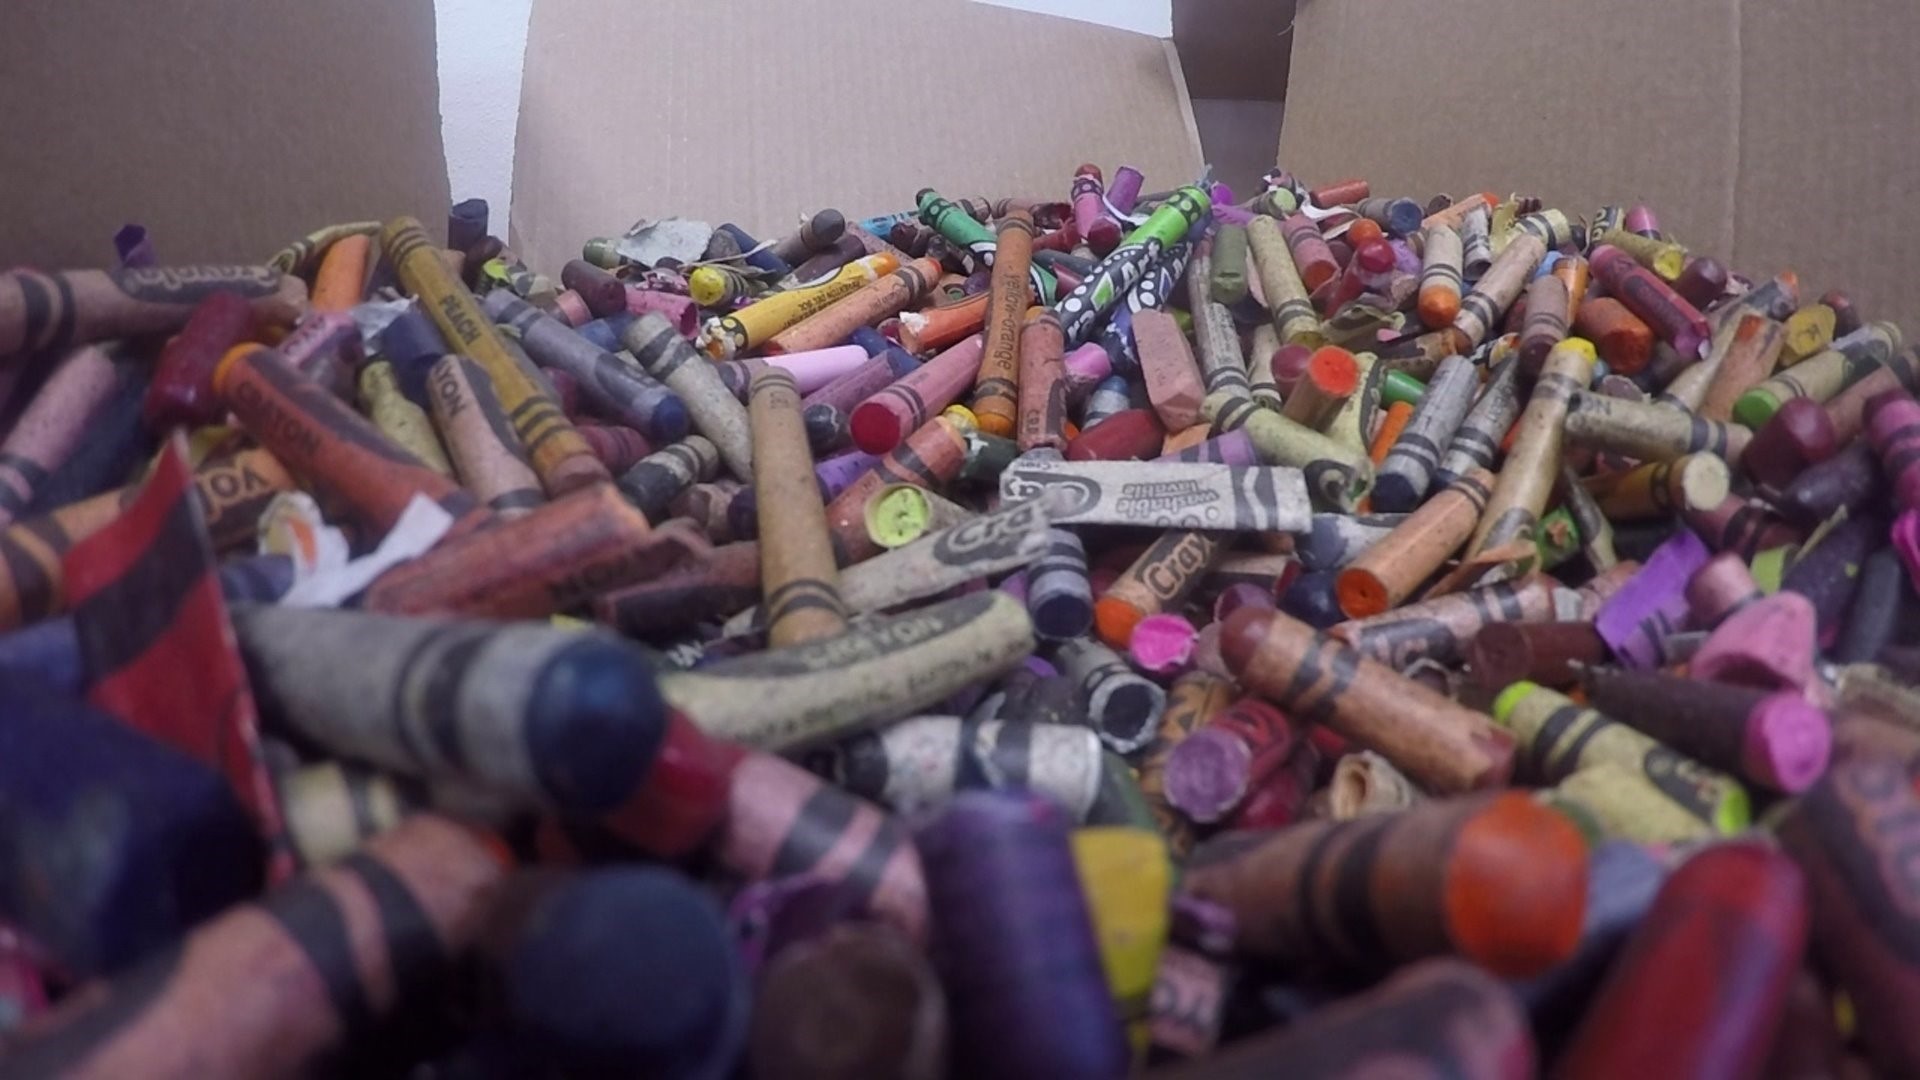 Recycling crayons is expensive